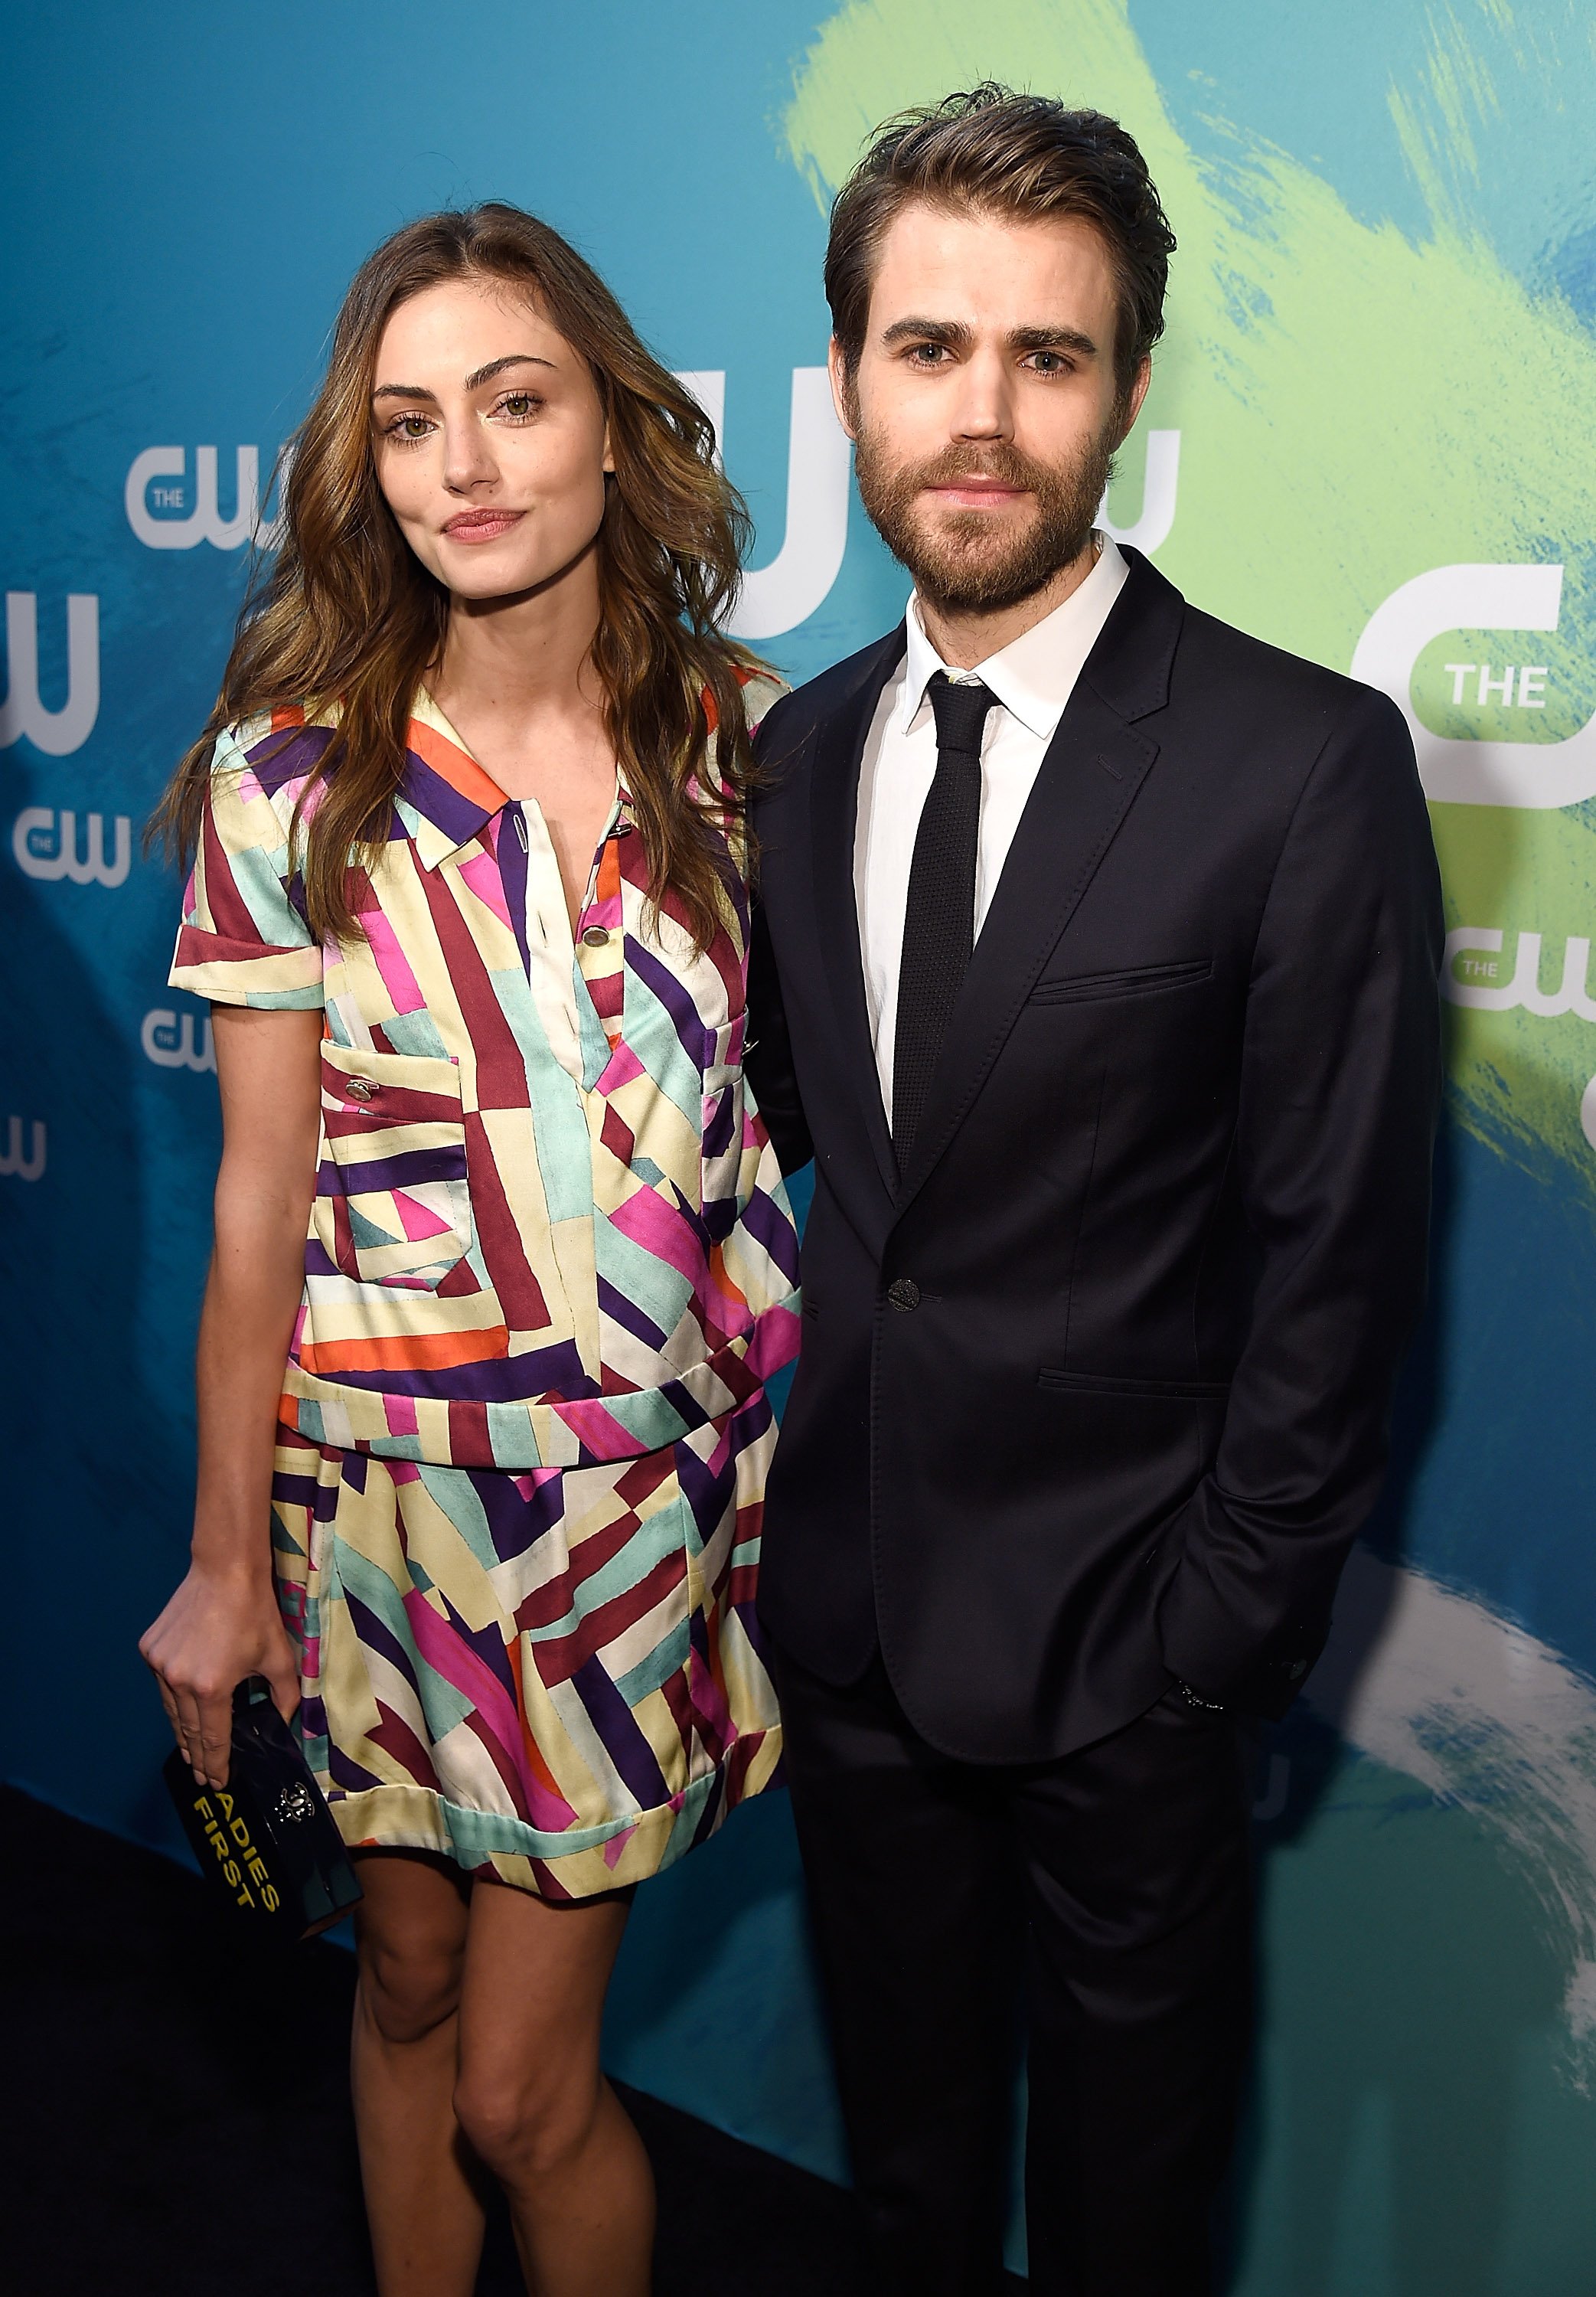 Phoebe Tonkin and Paul Wesley attend The CW Network's 2016 Upfront on May 19, 2016 in New York City. I Source: Getty Images